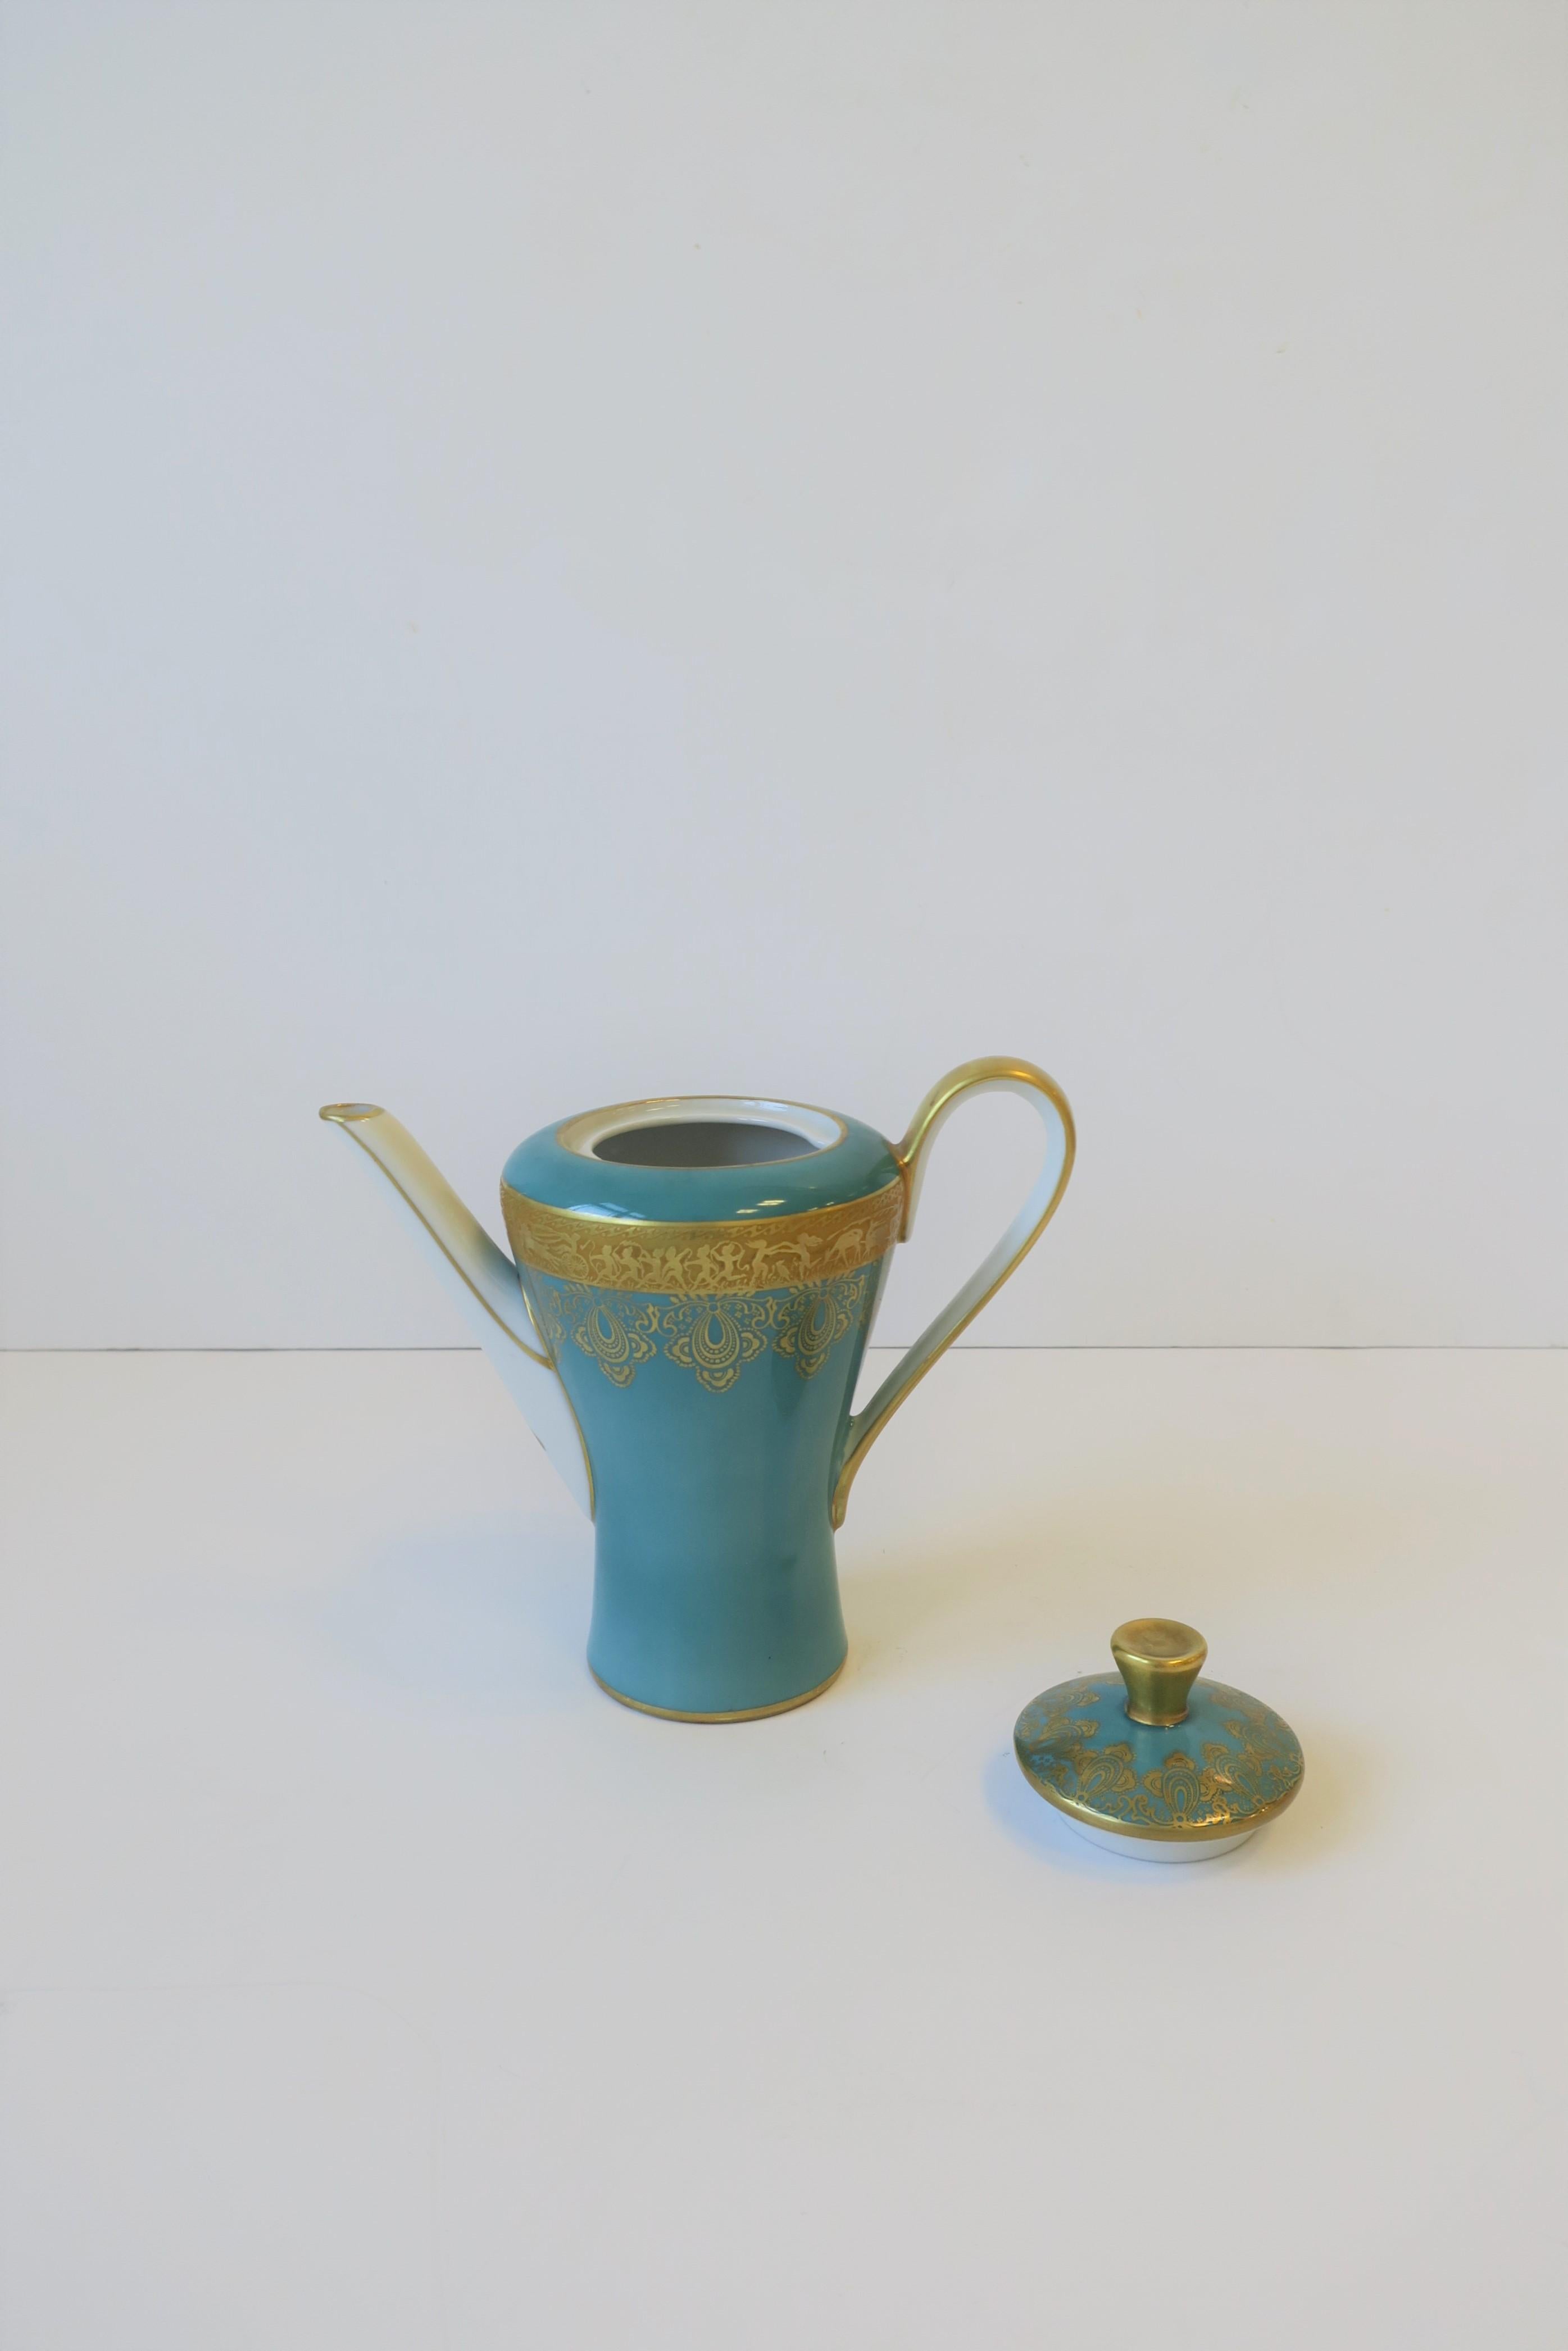 German Blue White and Gold Porcelain Tea or Coffee Pot 5